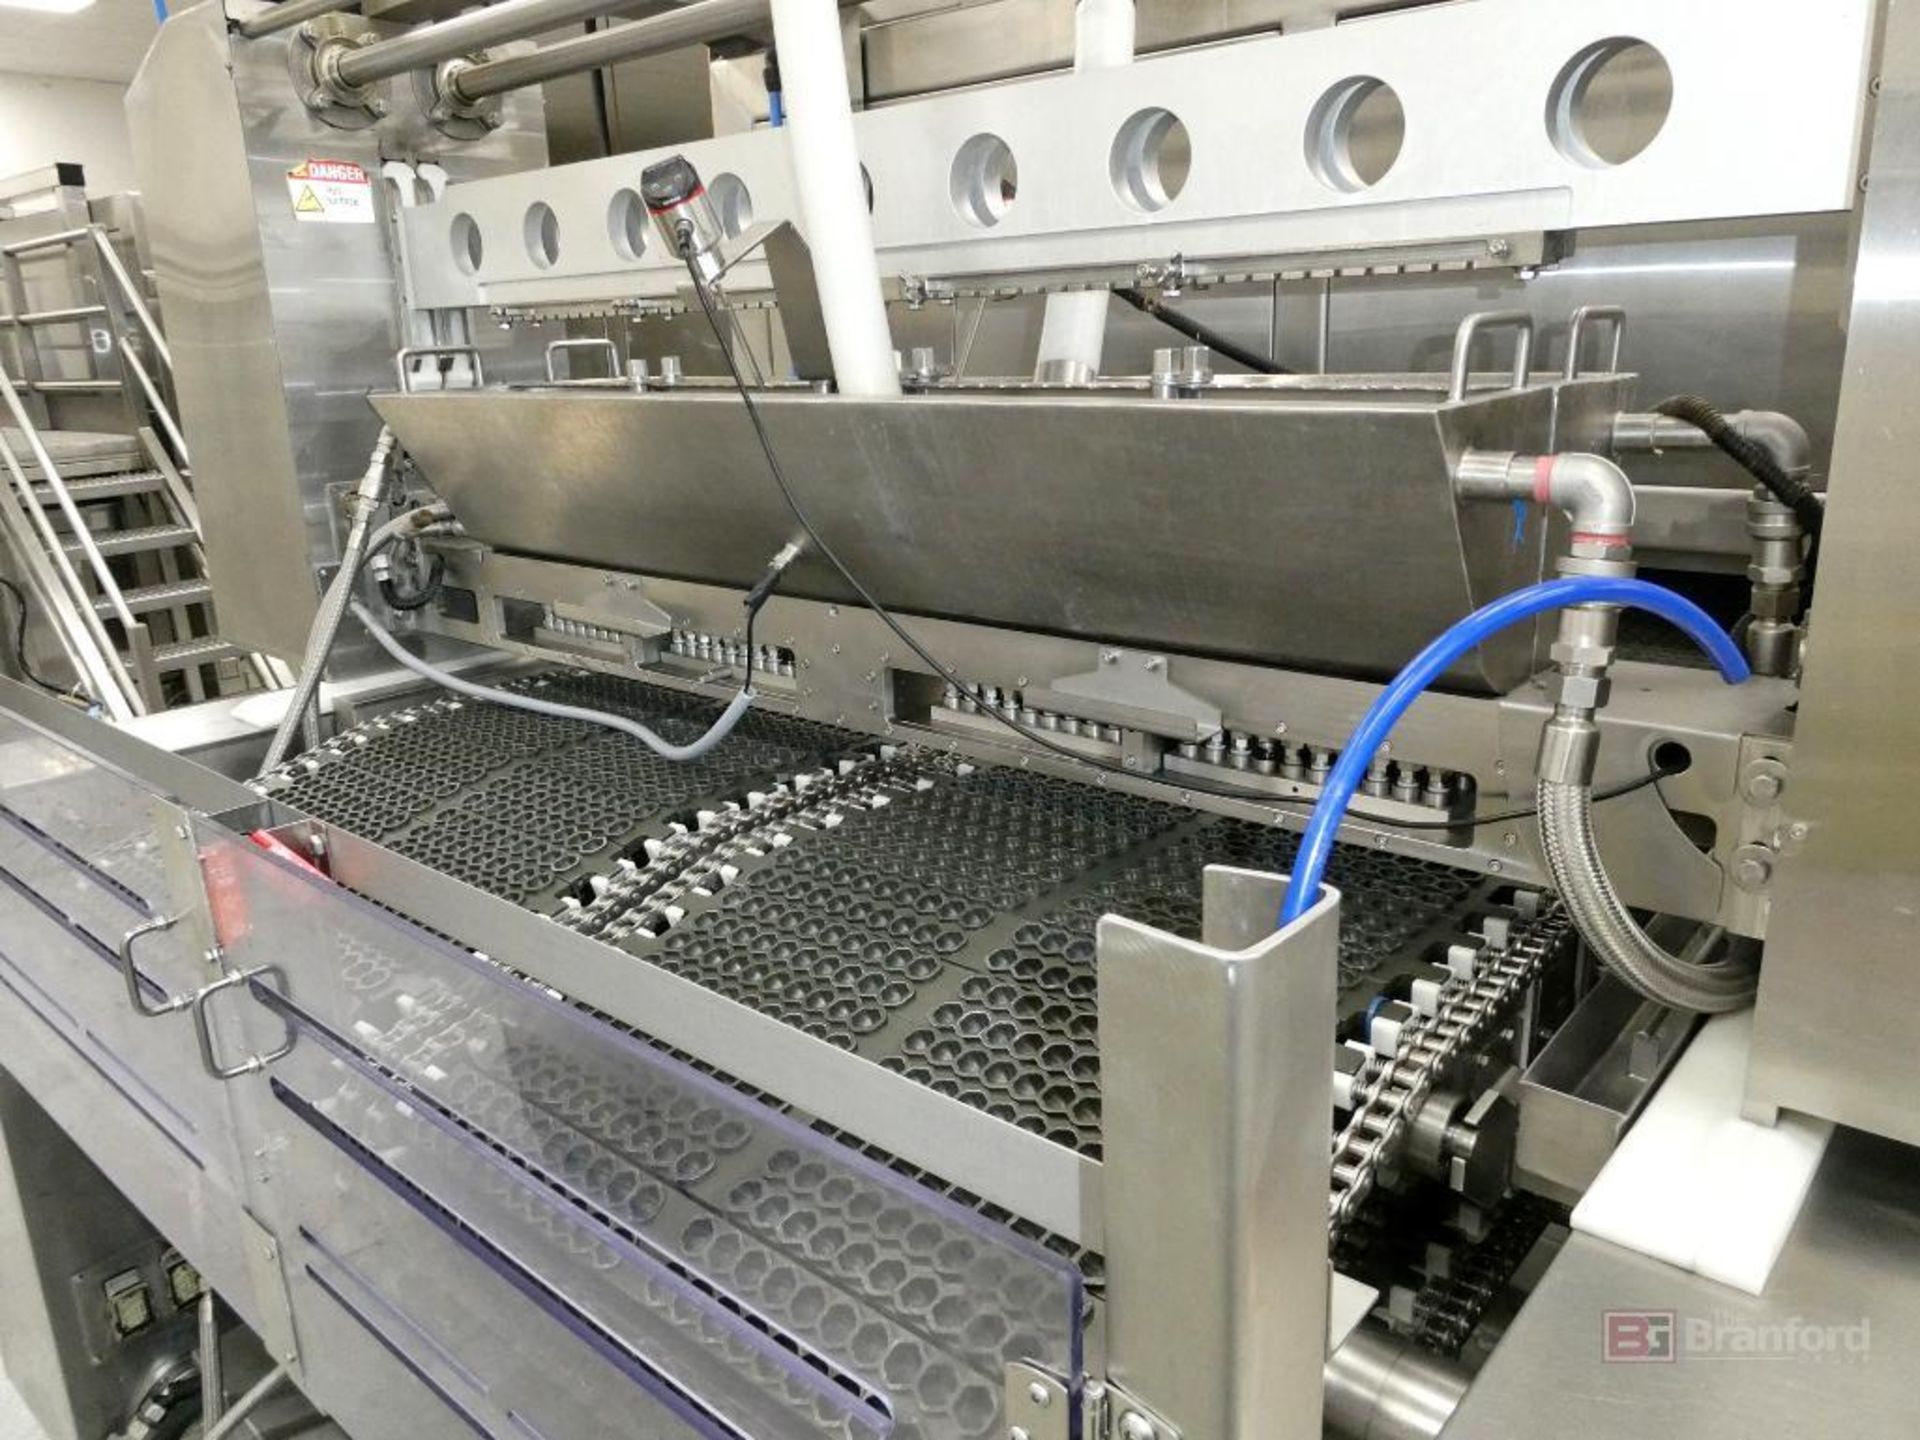 Sino Fude Machinery Dual Hopper Servo Driven Stainless Steel Depositor-Gummy Production Line - Image 11 of 18